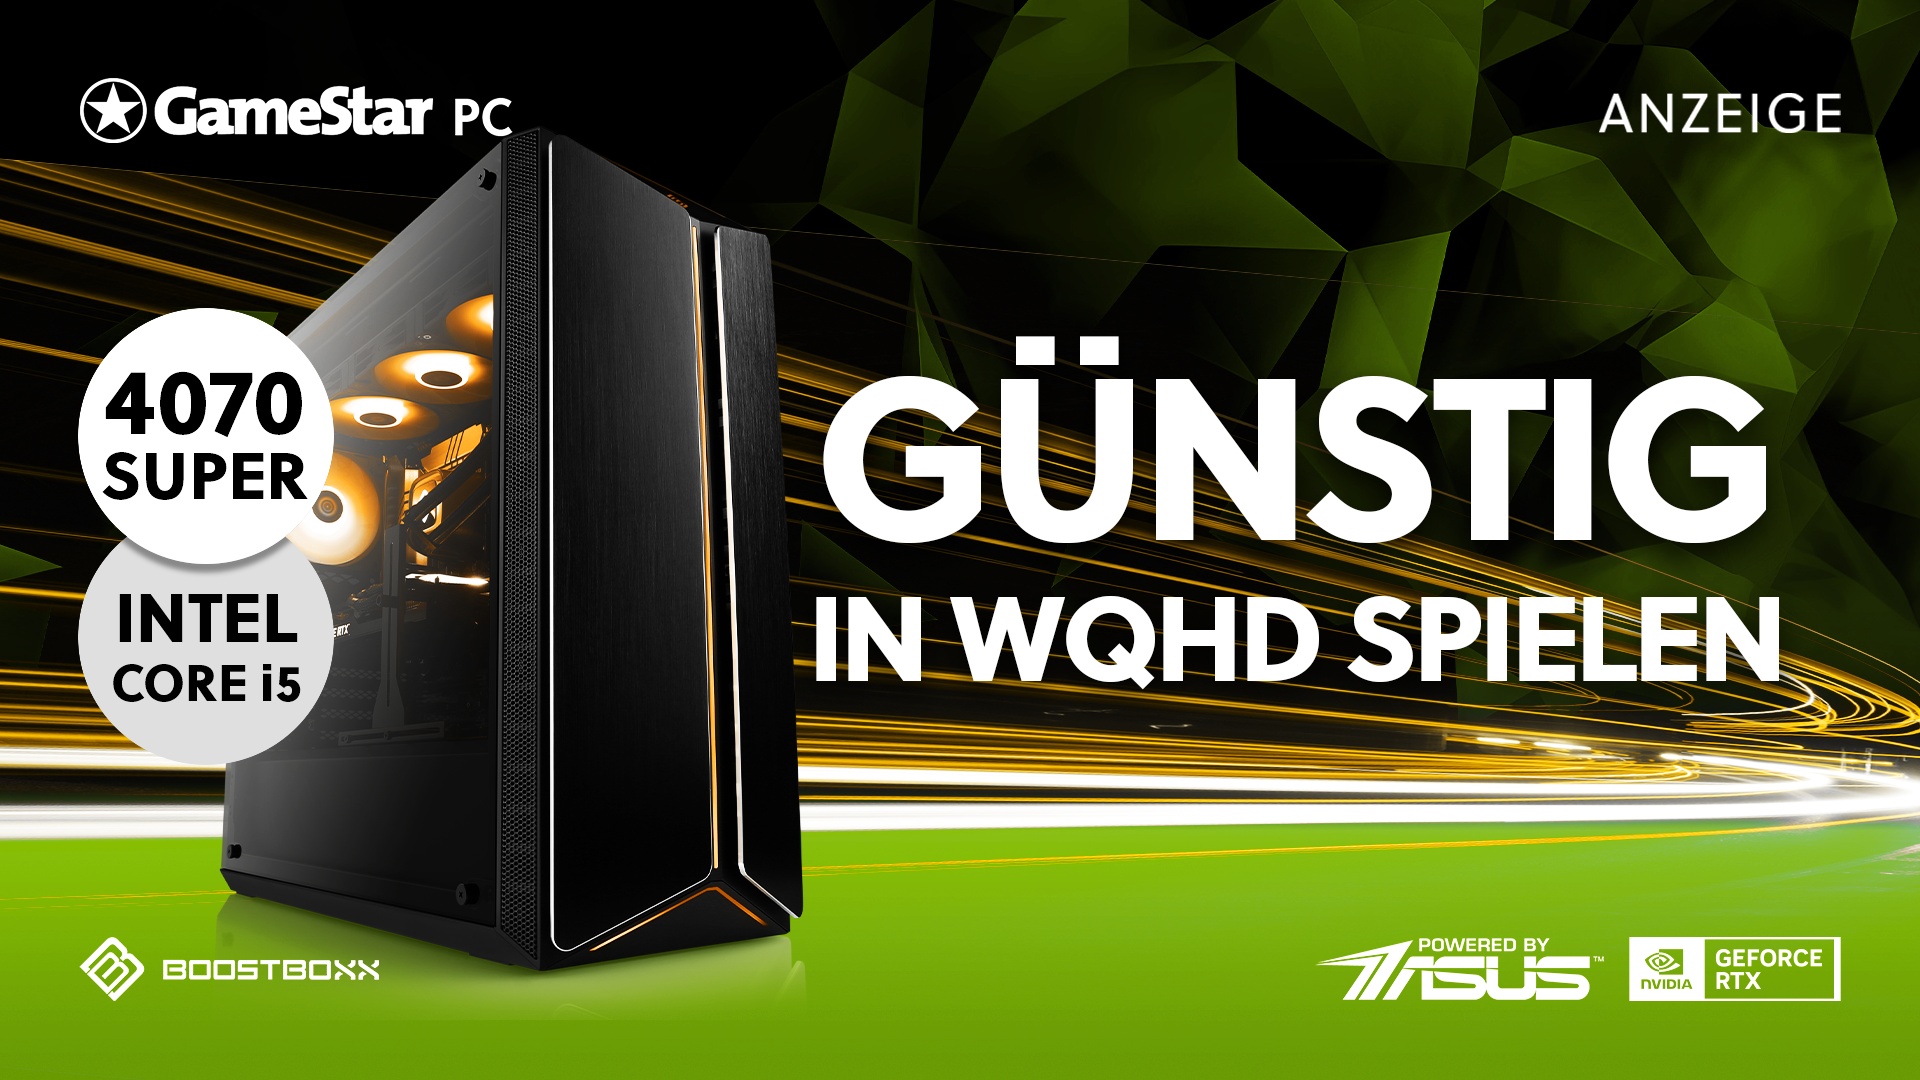 Powerful GameStar PC with RTX 4070 Super and Core i5